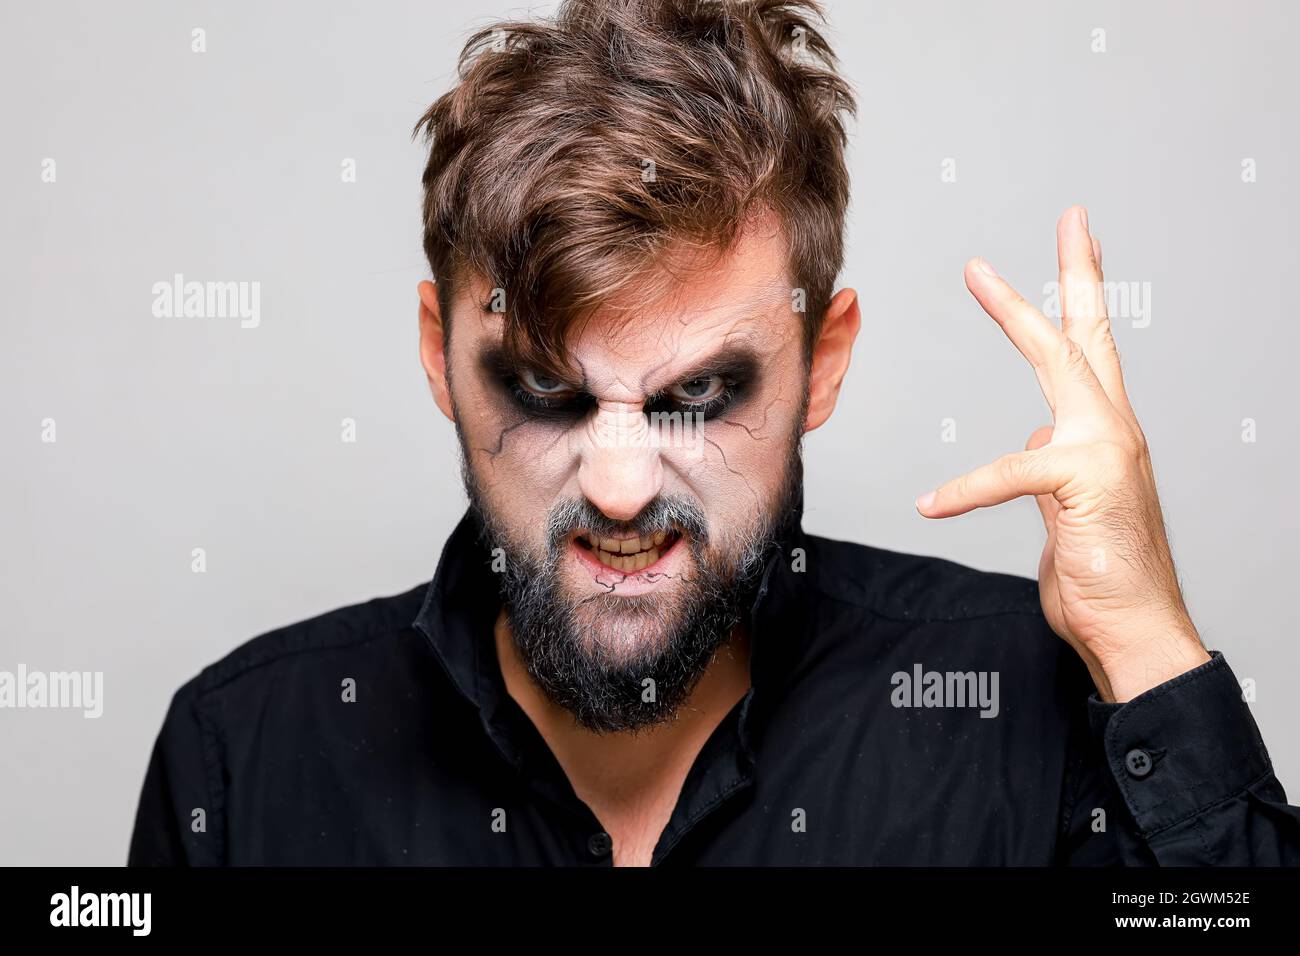 The frightening look of a bearded man with undead-style makeup for Halloween Stock Photo